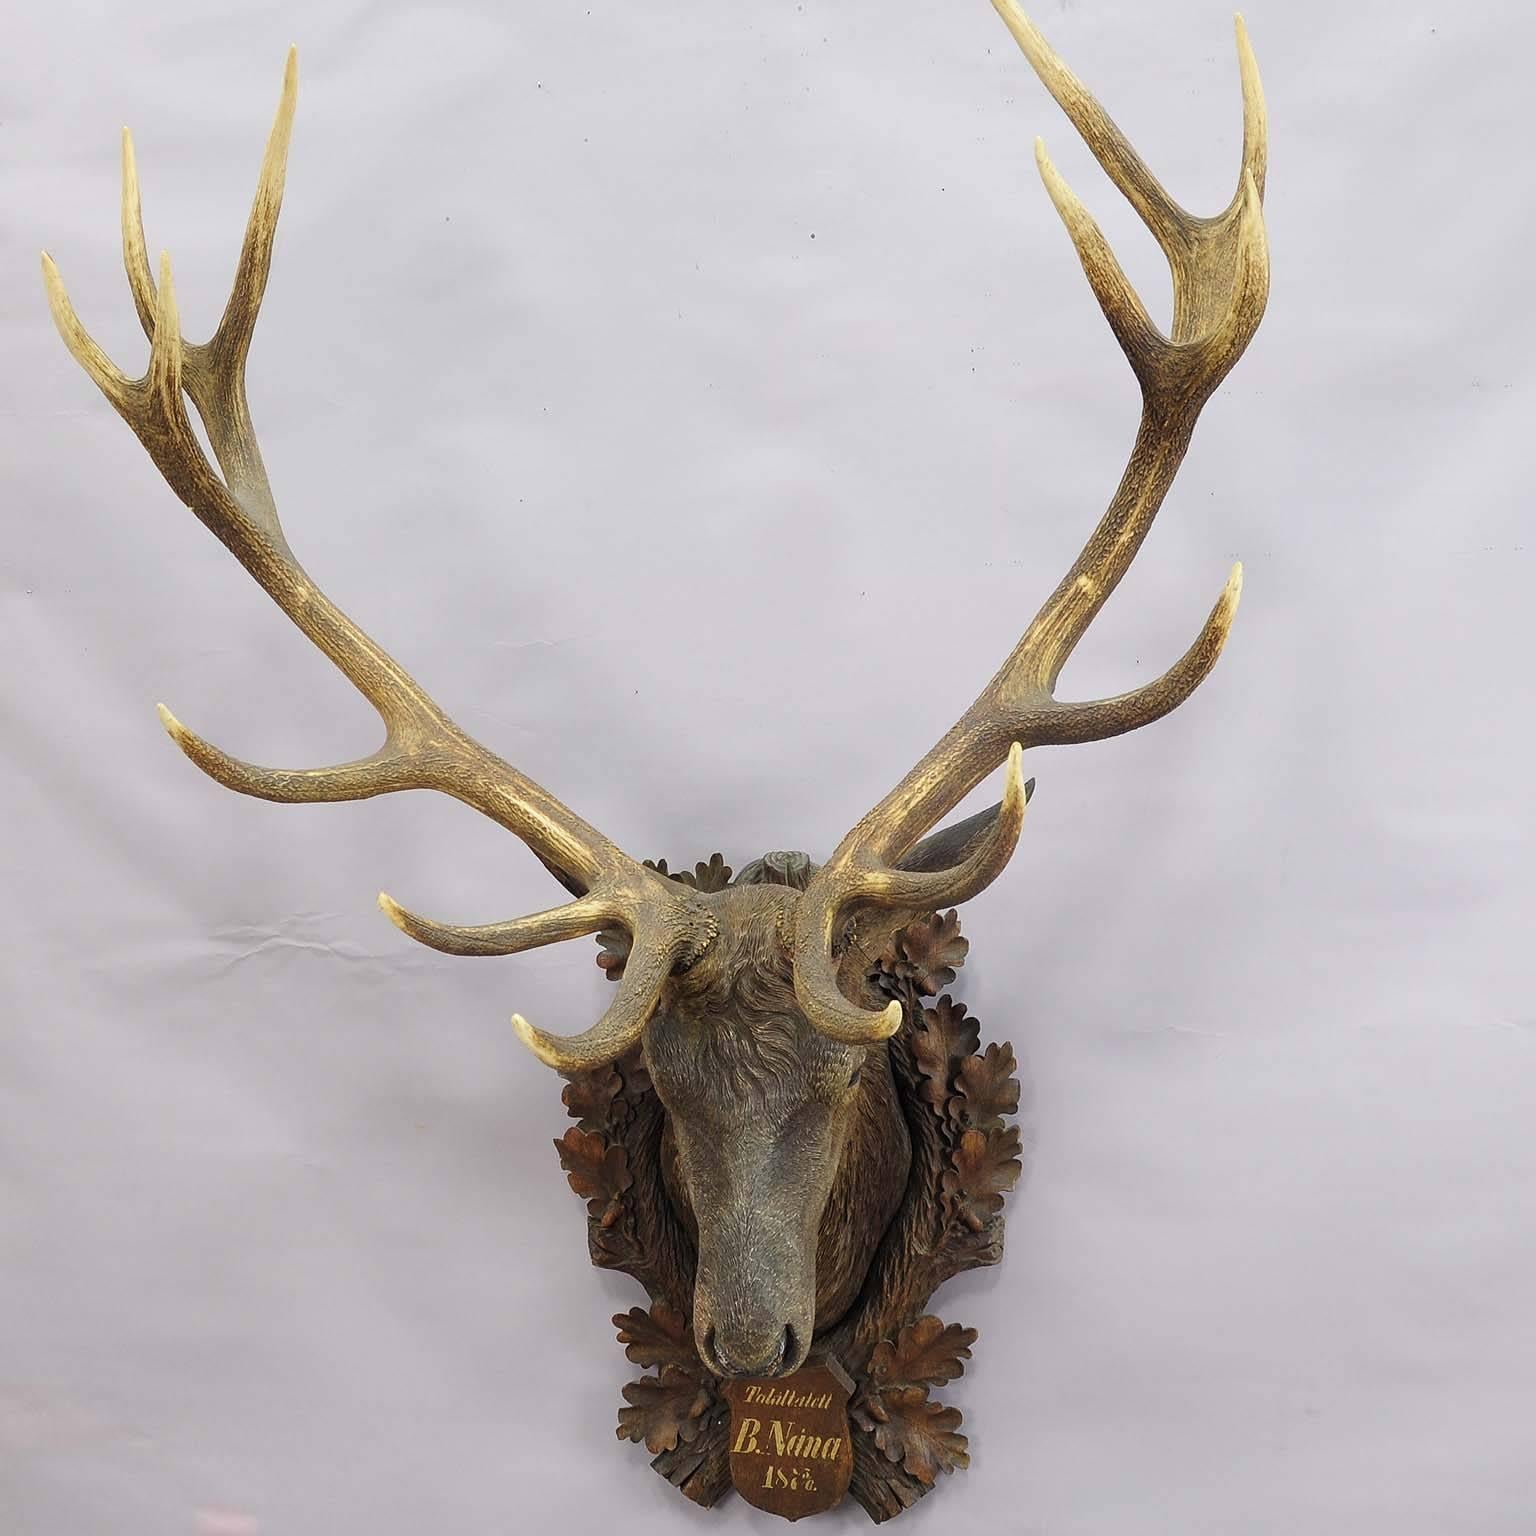 A world-class Black forest wooden carved lifesize stag's head with real antlers. Carved with fine details and painted in naturalistic style, mounted on a wooden carved plaque with inscription 1876. Carved by the famous Austrian woodcarver Rudolph